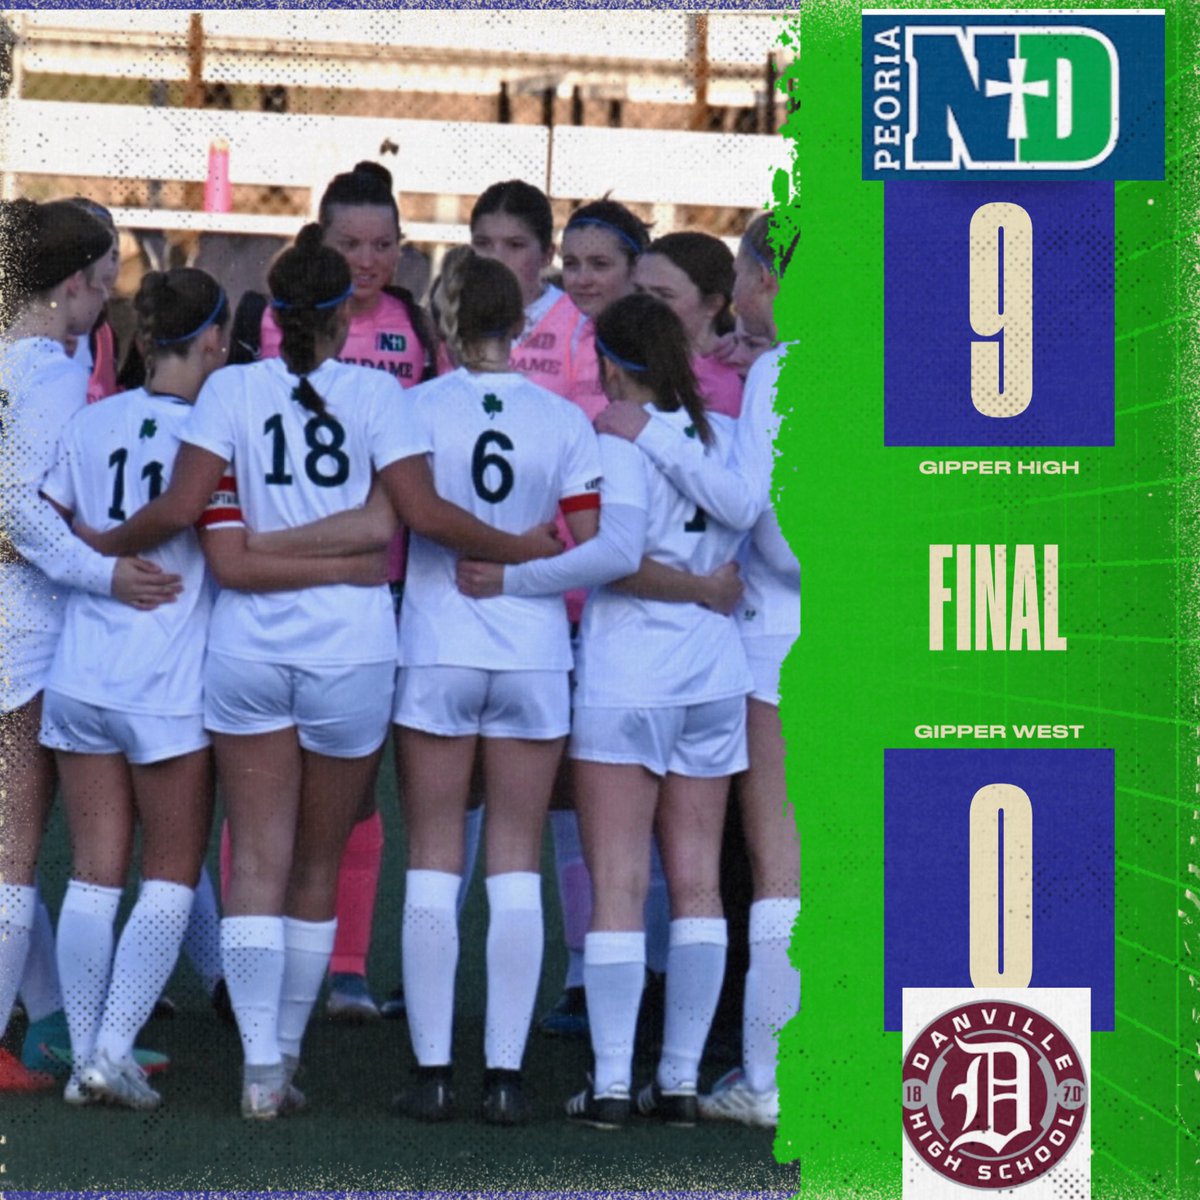 IRISH WIN!!! A pair of 9-0 wins for the girls to start off the conference 1-0. Back at it tomorrow to continue getting better! ☘️⚽️ #PNDsoccer